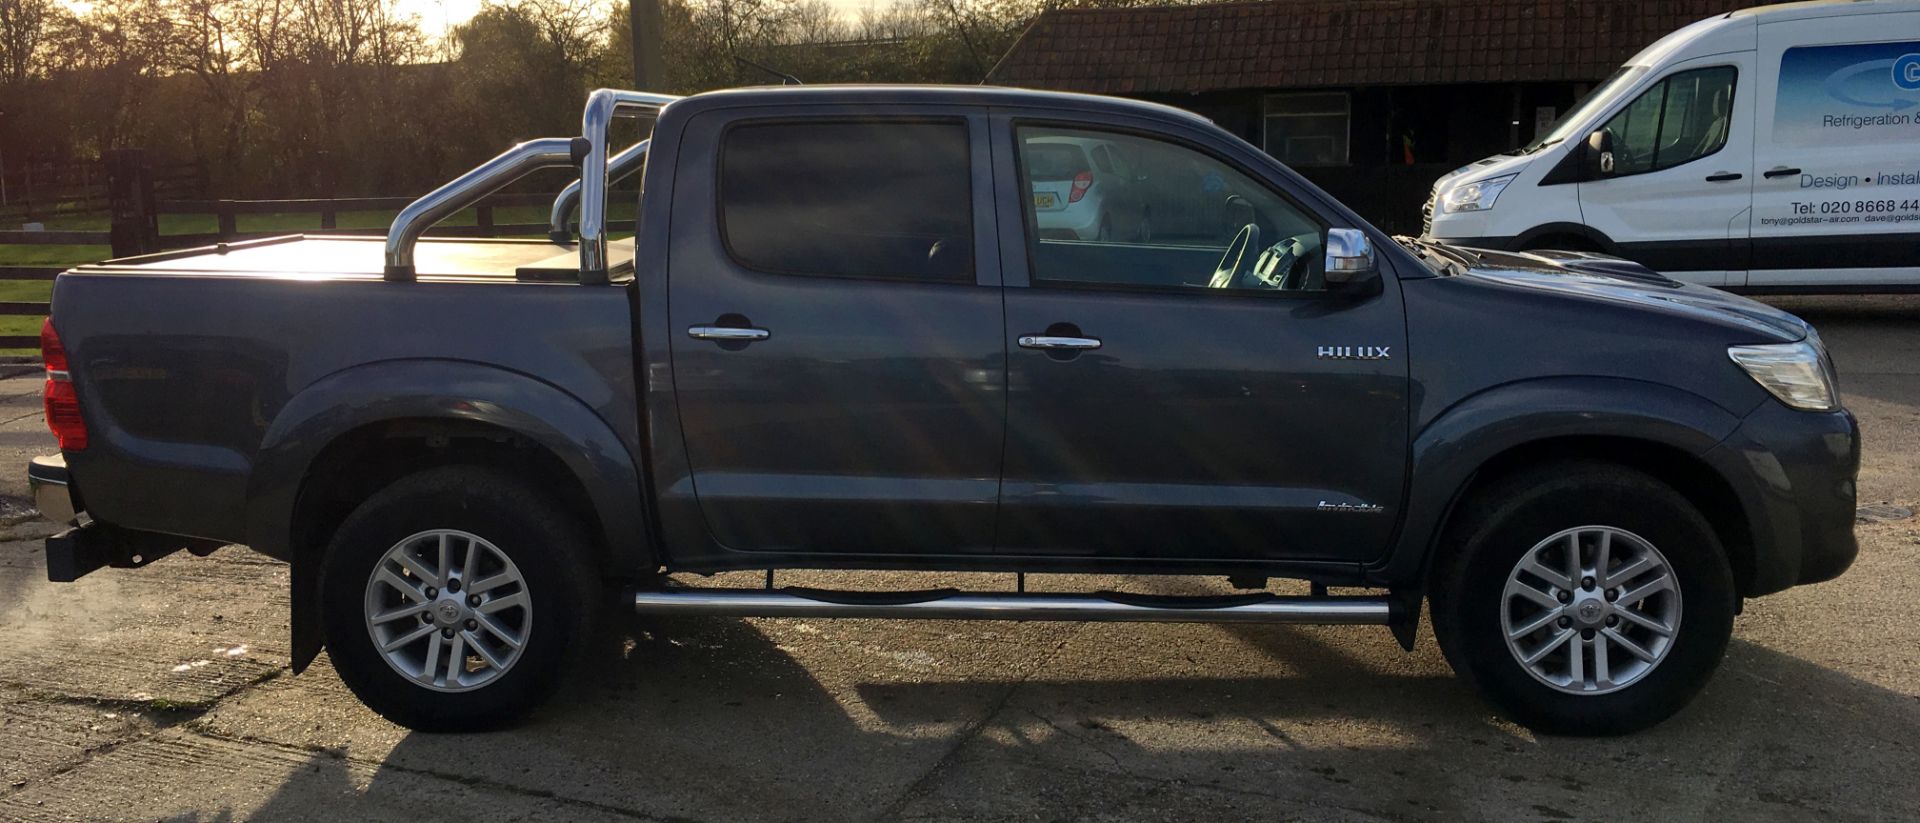 Toyota Hilux Invincible Double Cab D-4D 4WD 171 Auto, LR63 JVX, First Registered 10th October - Image 4 of 10